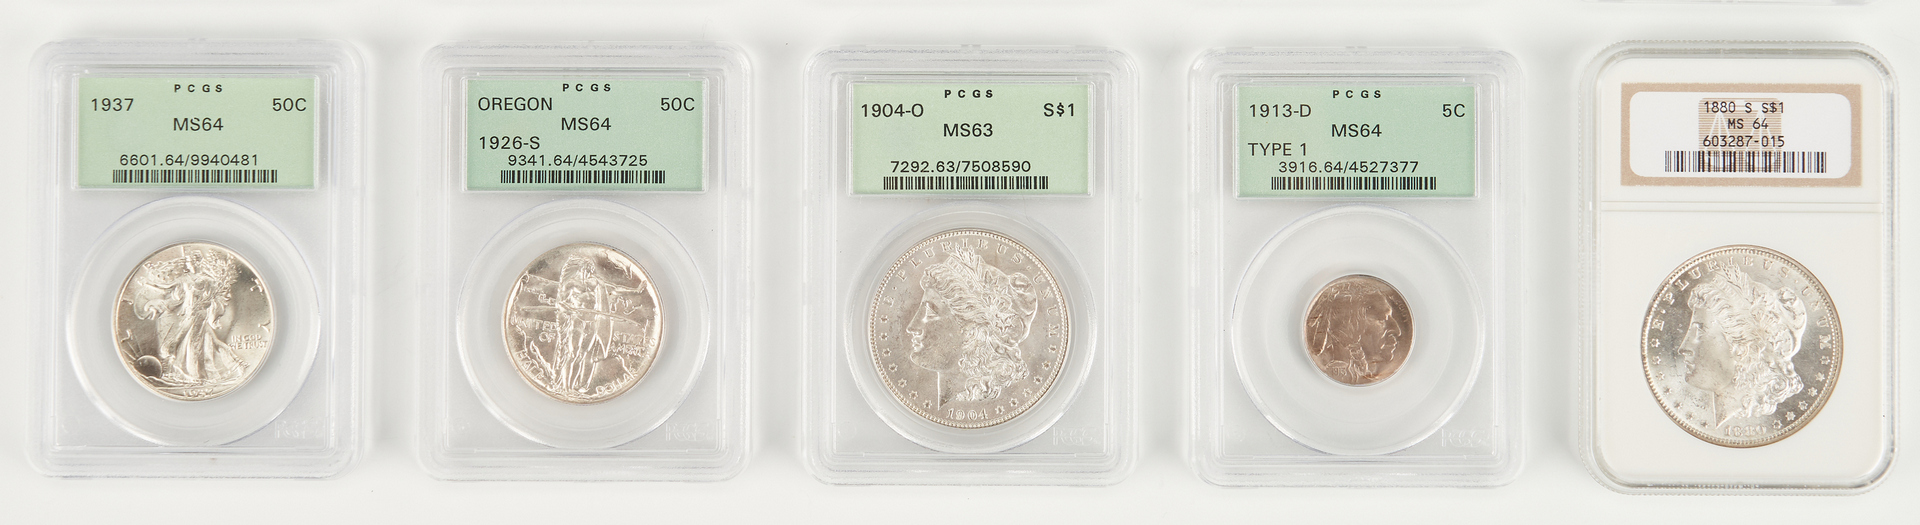 Lot 1166: 10 PCGS or ANA Graded Coins, incl. Morgan Dollars